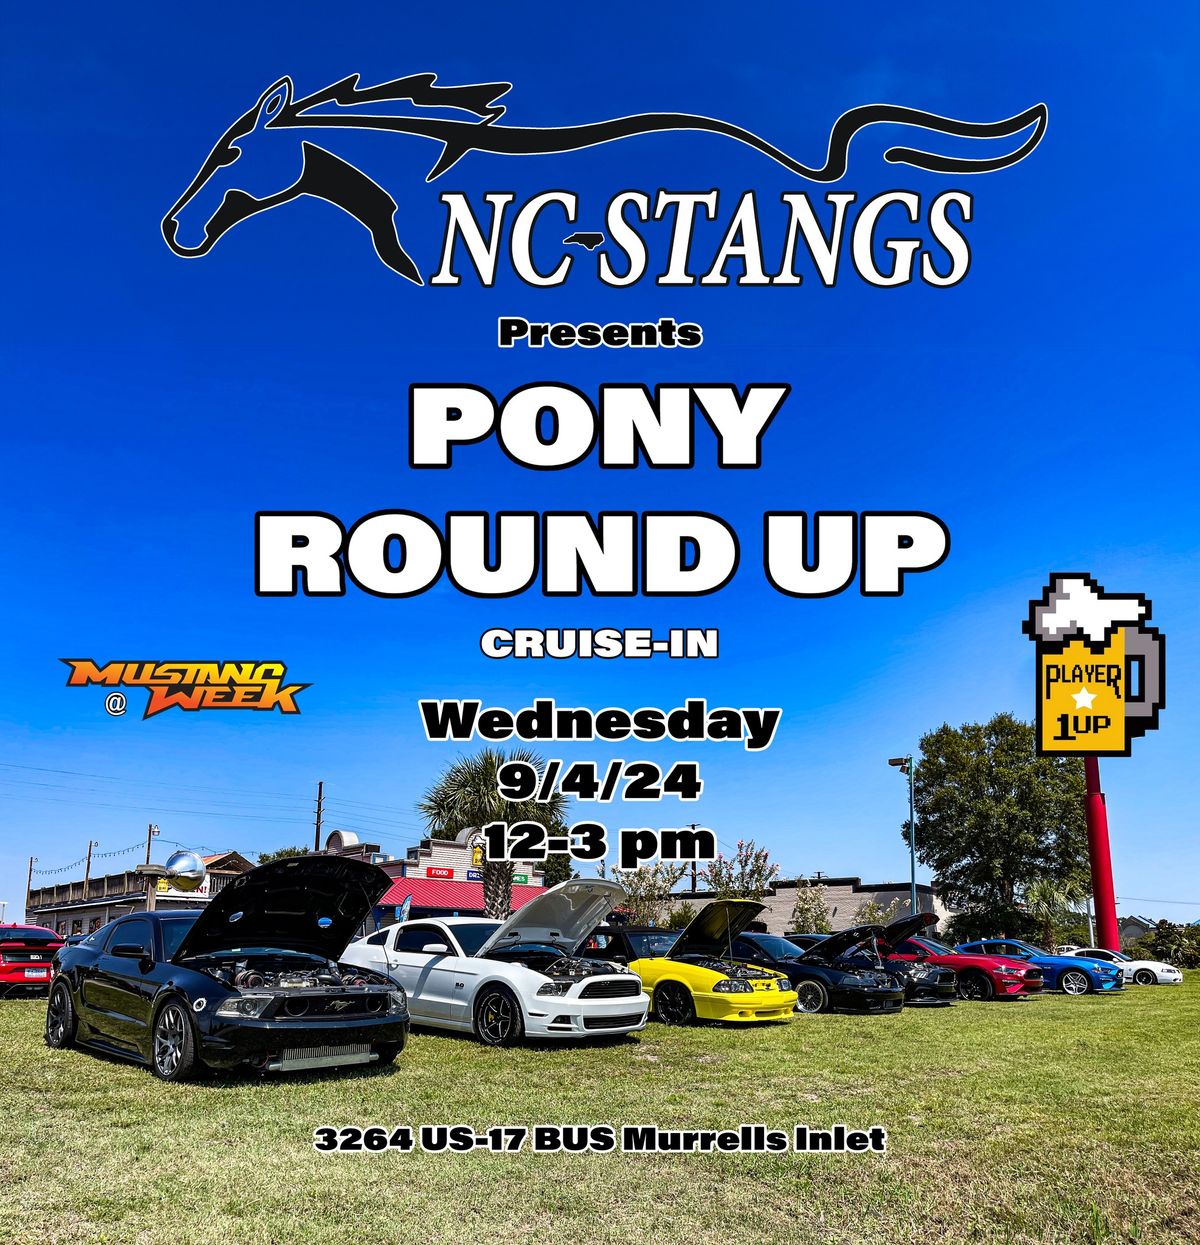 Pony Round Up @Mustang Week